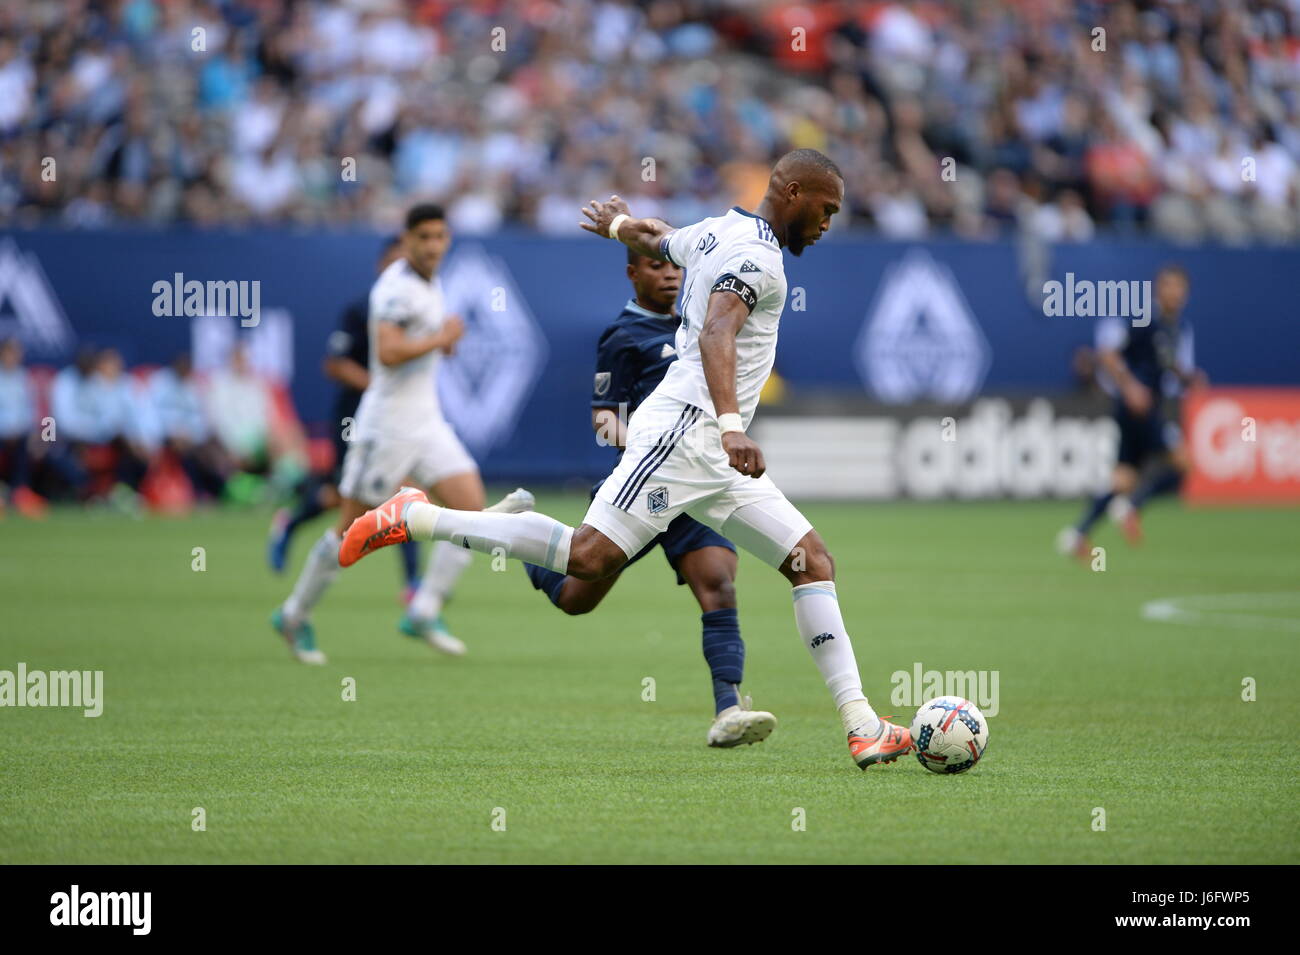 Vancouver, Canada. 20 May 2017. Kendall Waston (4) of Vancouver Whitecaps, moving with the ball.  Vancouver Whitecaps vs Sporting Kansas City. BC Place Stadium.  © Gerry Rousseau/Alamy Live News Stock Photo